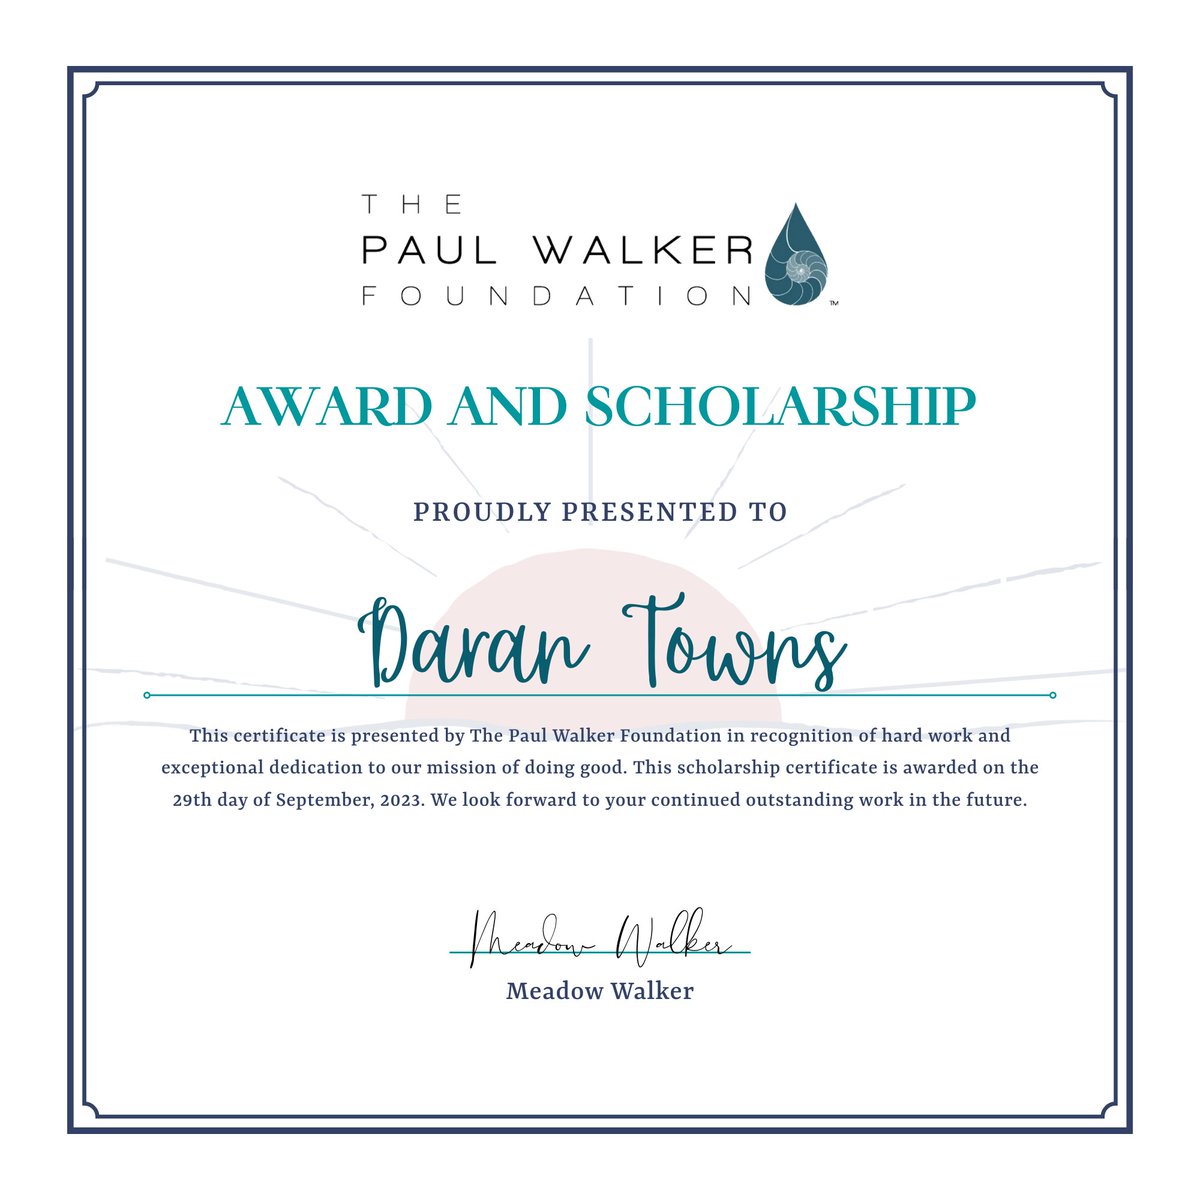 We are proud to announce Daran Towns as the 2023 Paul Walker Foundation Award and Scholarship recipient. 💙 This scholarship is in recognition of her hard work and exceptional dedication to our mission of doing good. Visit paulwalkerfoundation.org to learn more. #dogood